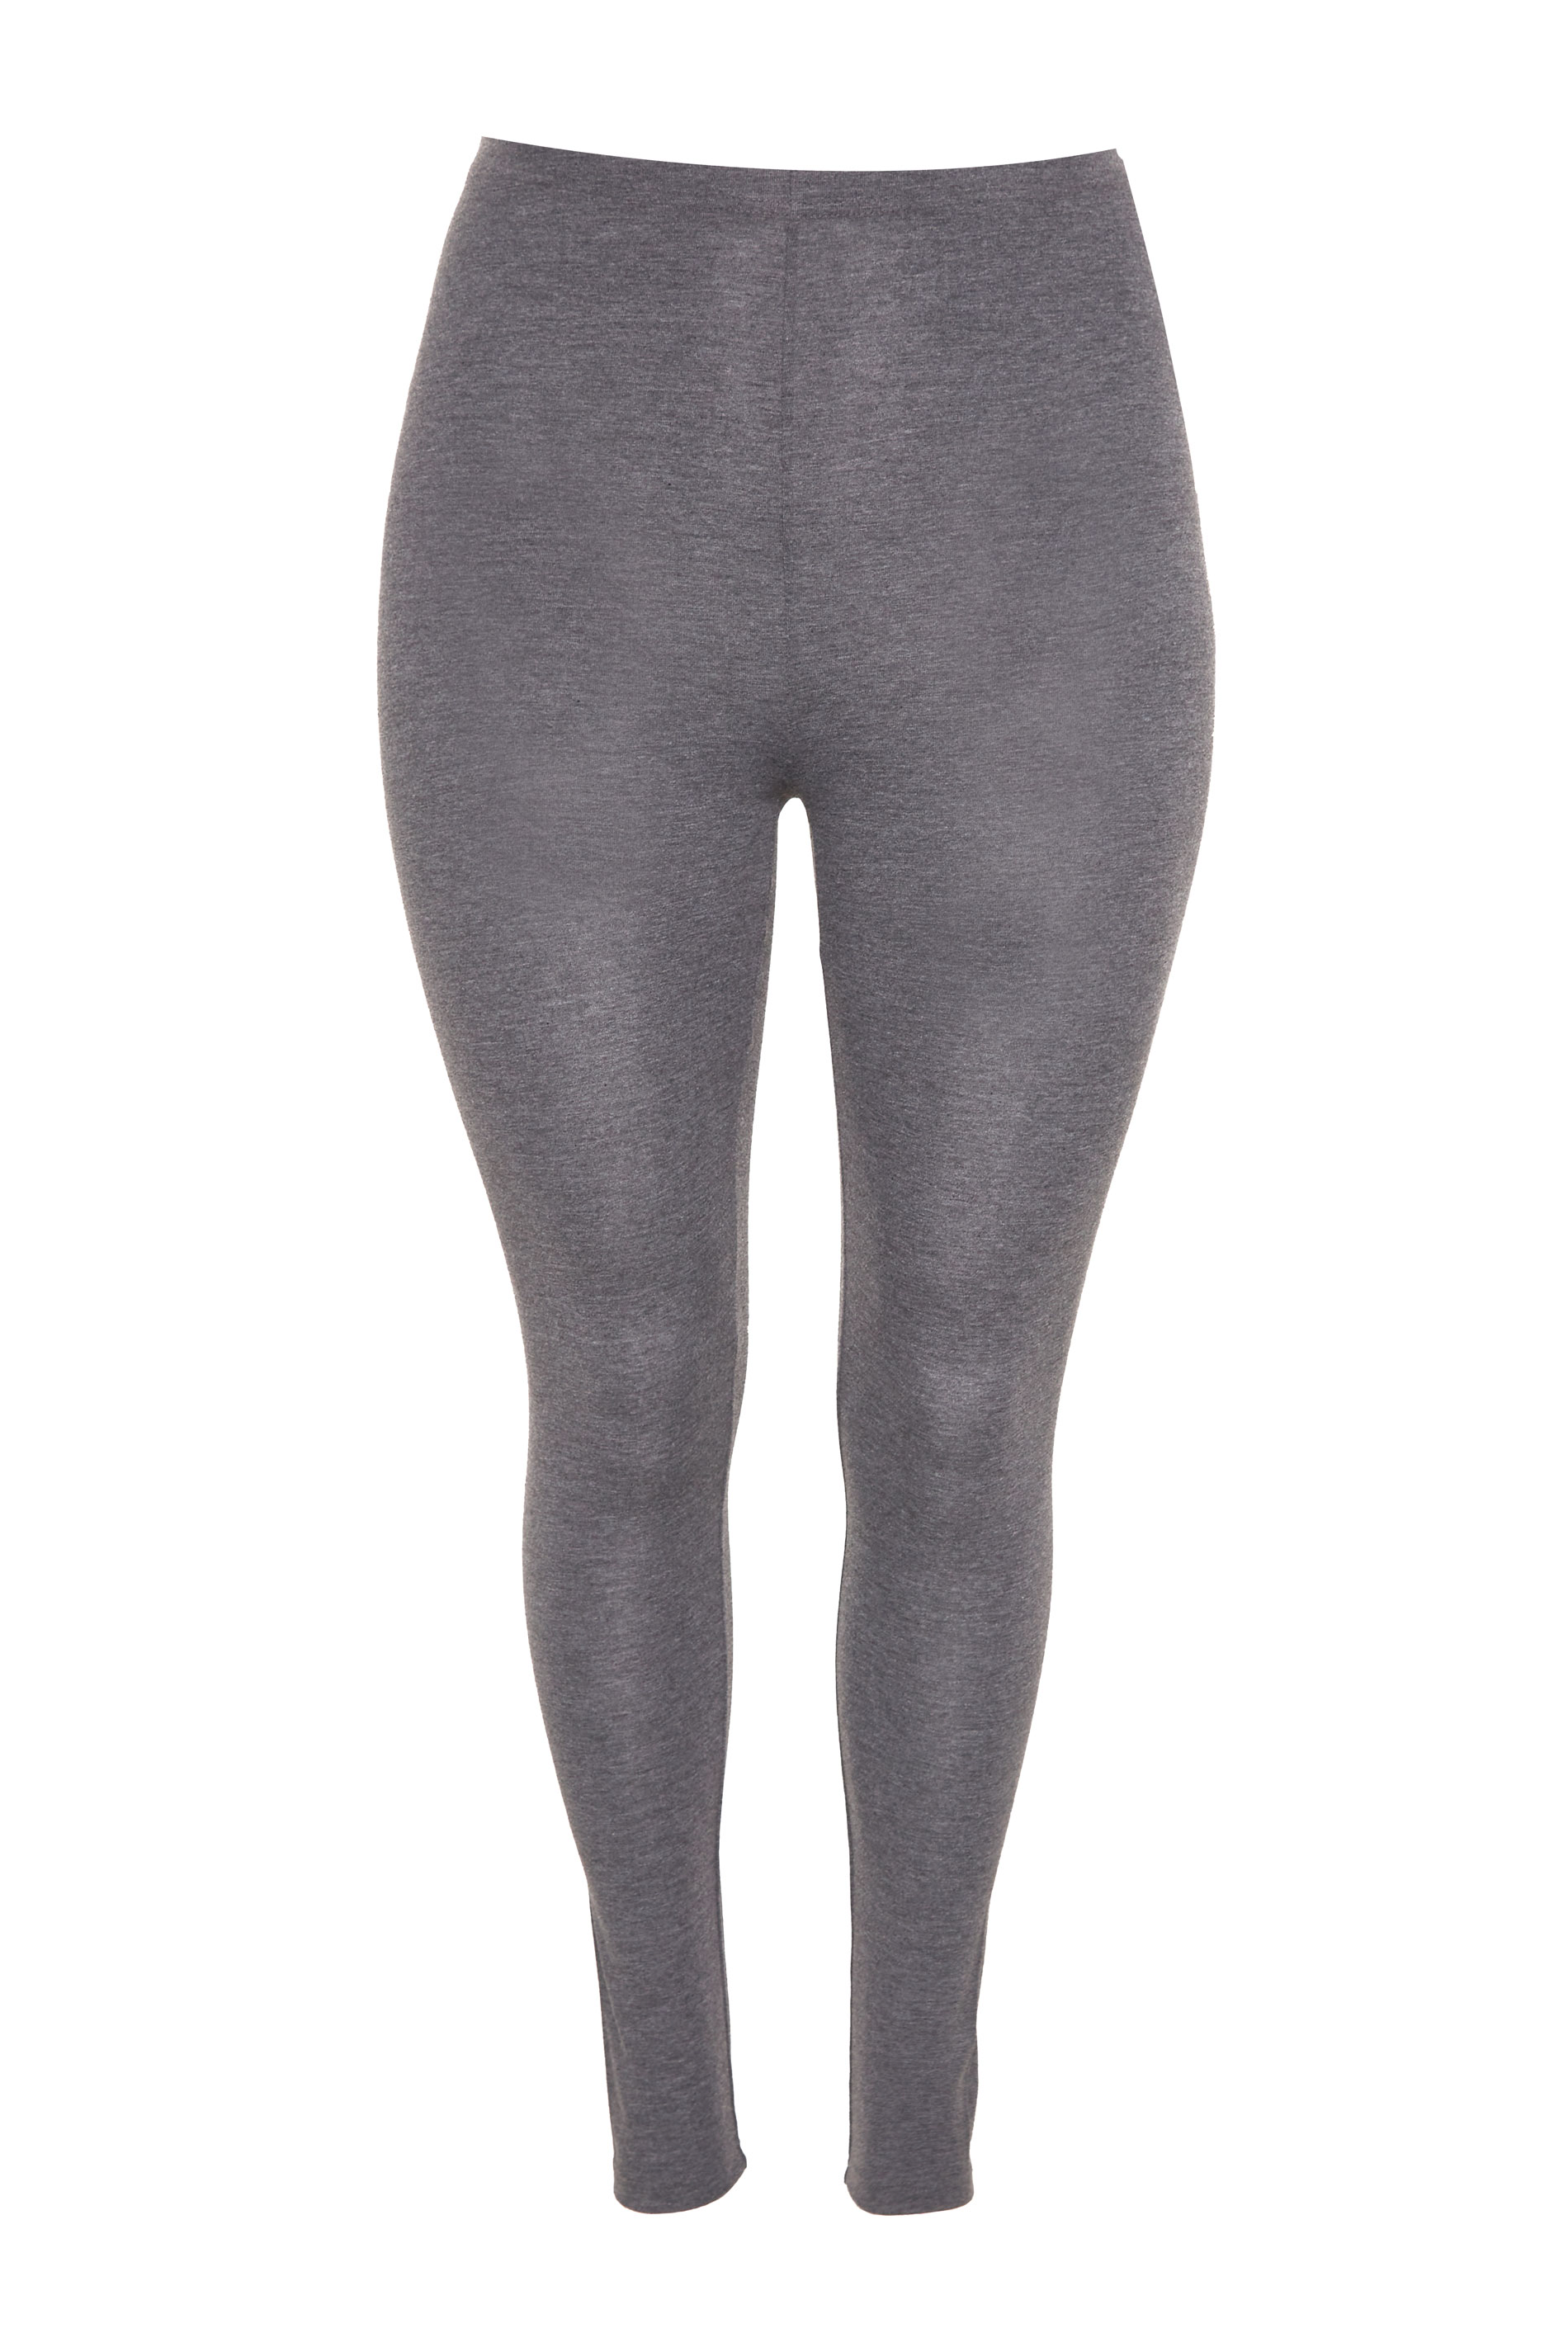 Plus Size YOURS FOR GOOD Grey Viscose Leggings